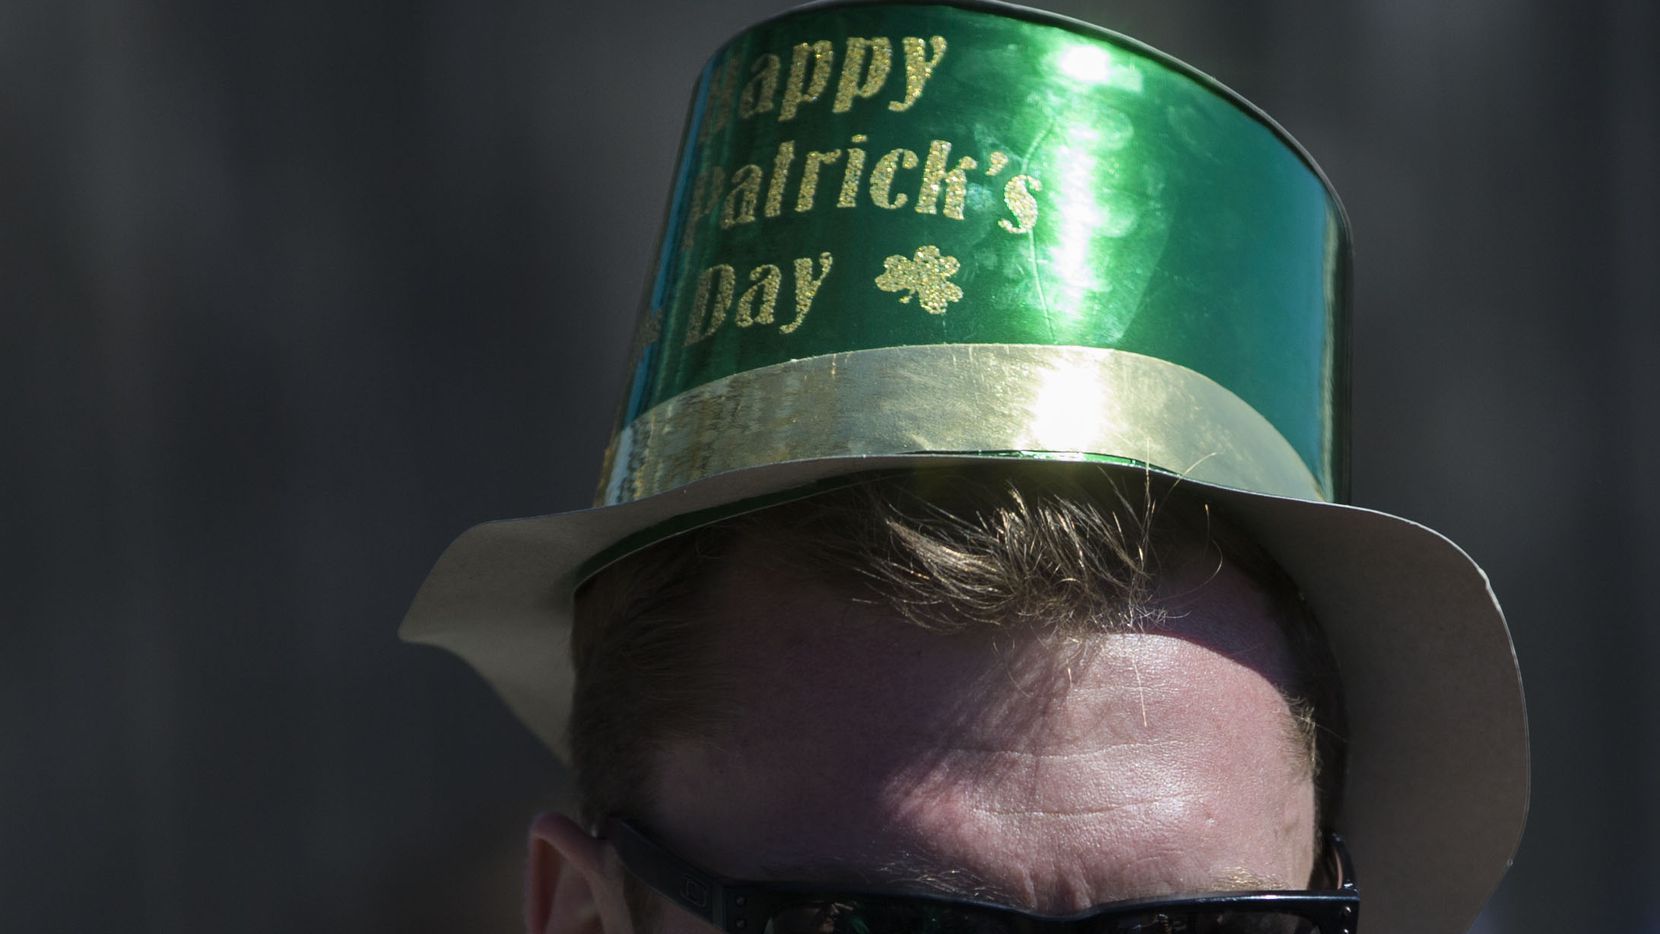 A man wearing a hat that says "Happy St. Patrick's Day" during the Lower Greenville Avenue...